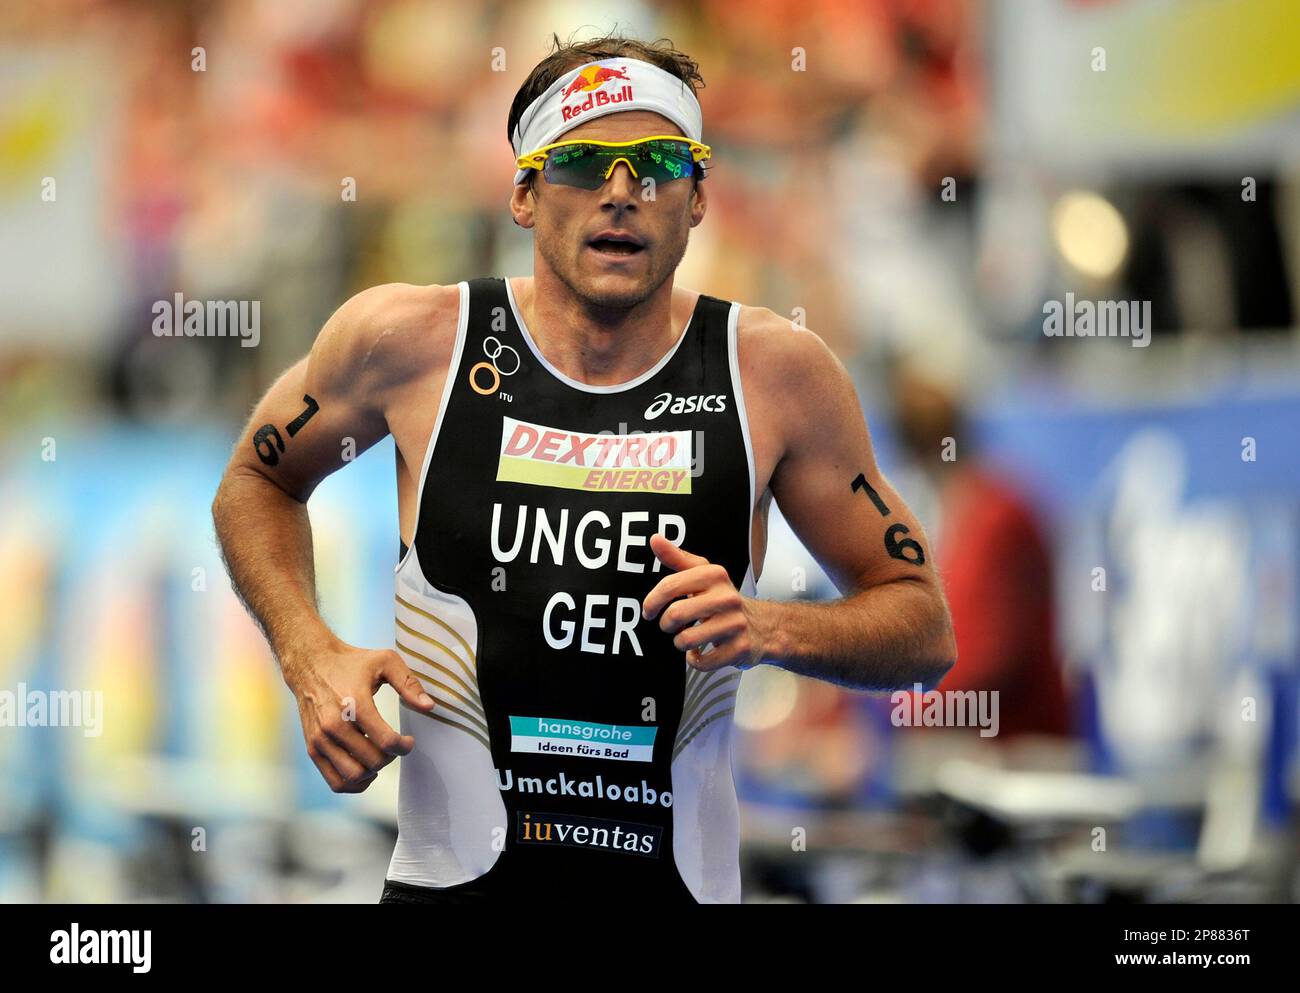 German athlete Daniel Unger is seen on his way during his race at the ITU men's Triathlon World Championship Series in Hamburg, northern Germany, Sunday, July 26, 2009. (AP Photo/Axel Heimken) Stock Photo